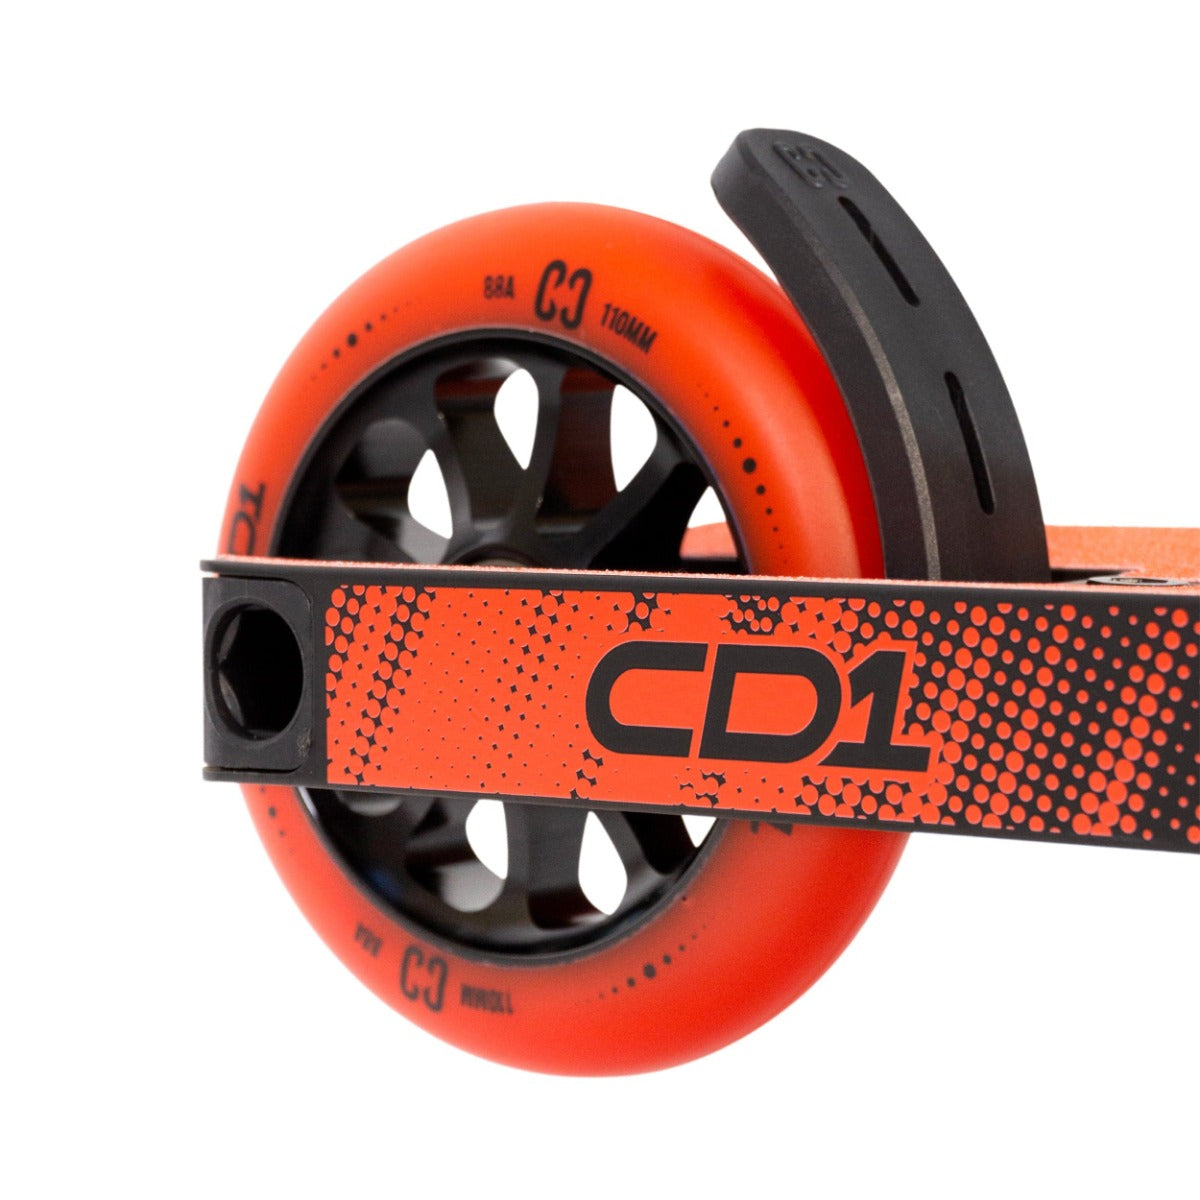 CORE CD1 Complete Stunt Scooter - Red / Black - Wheel